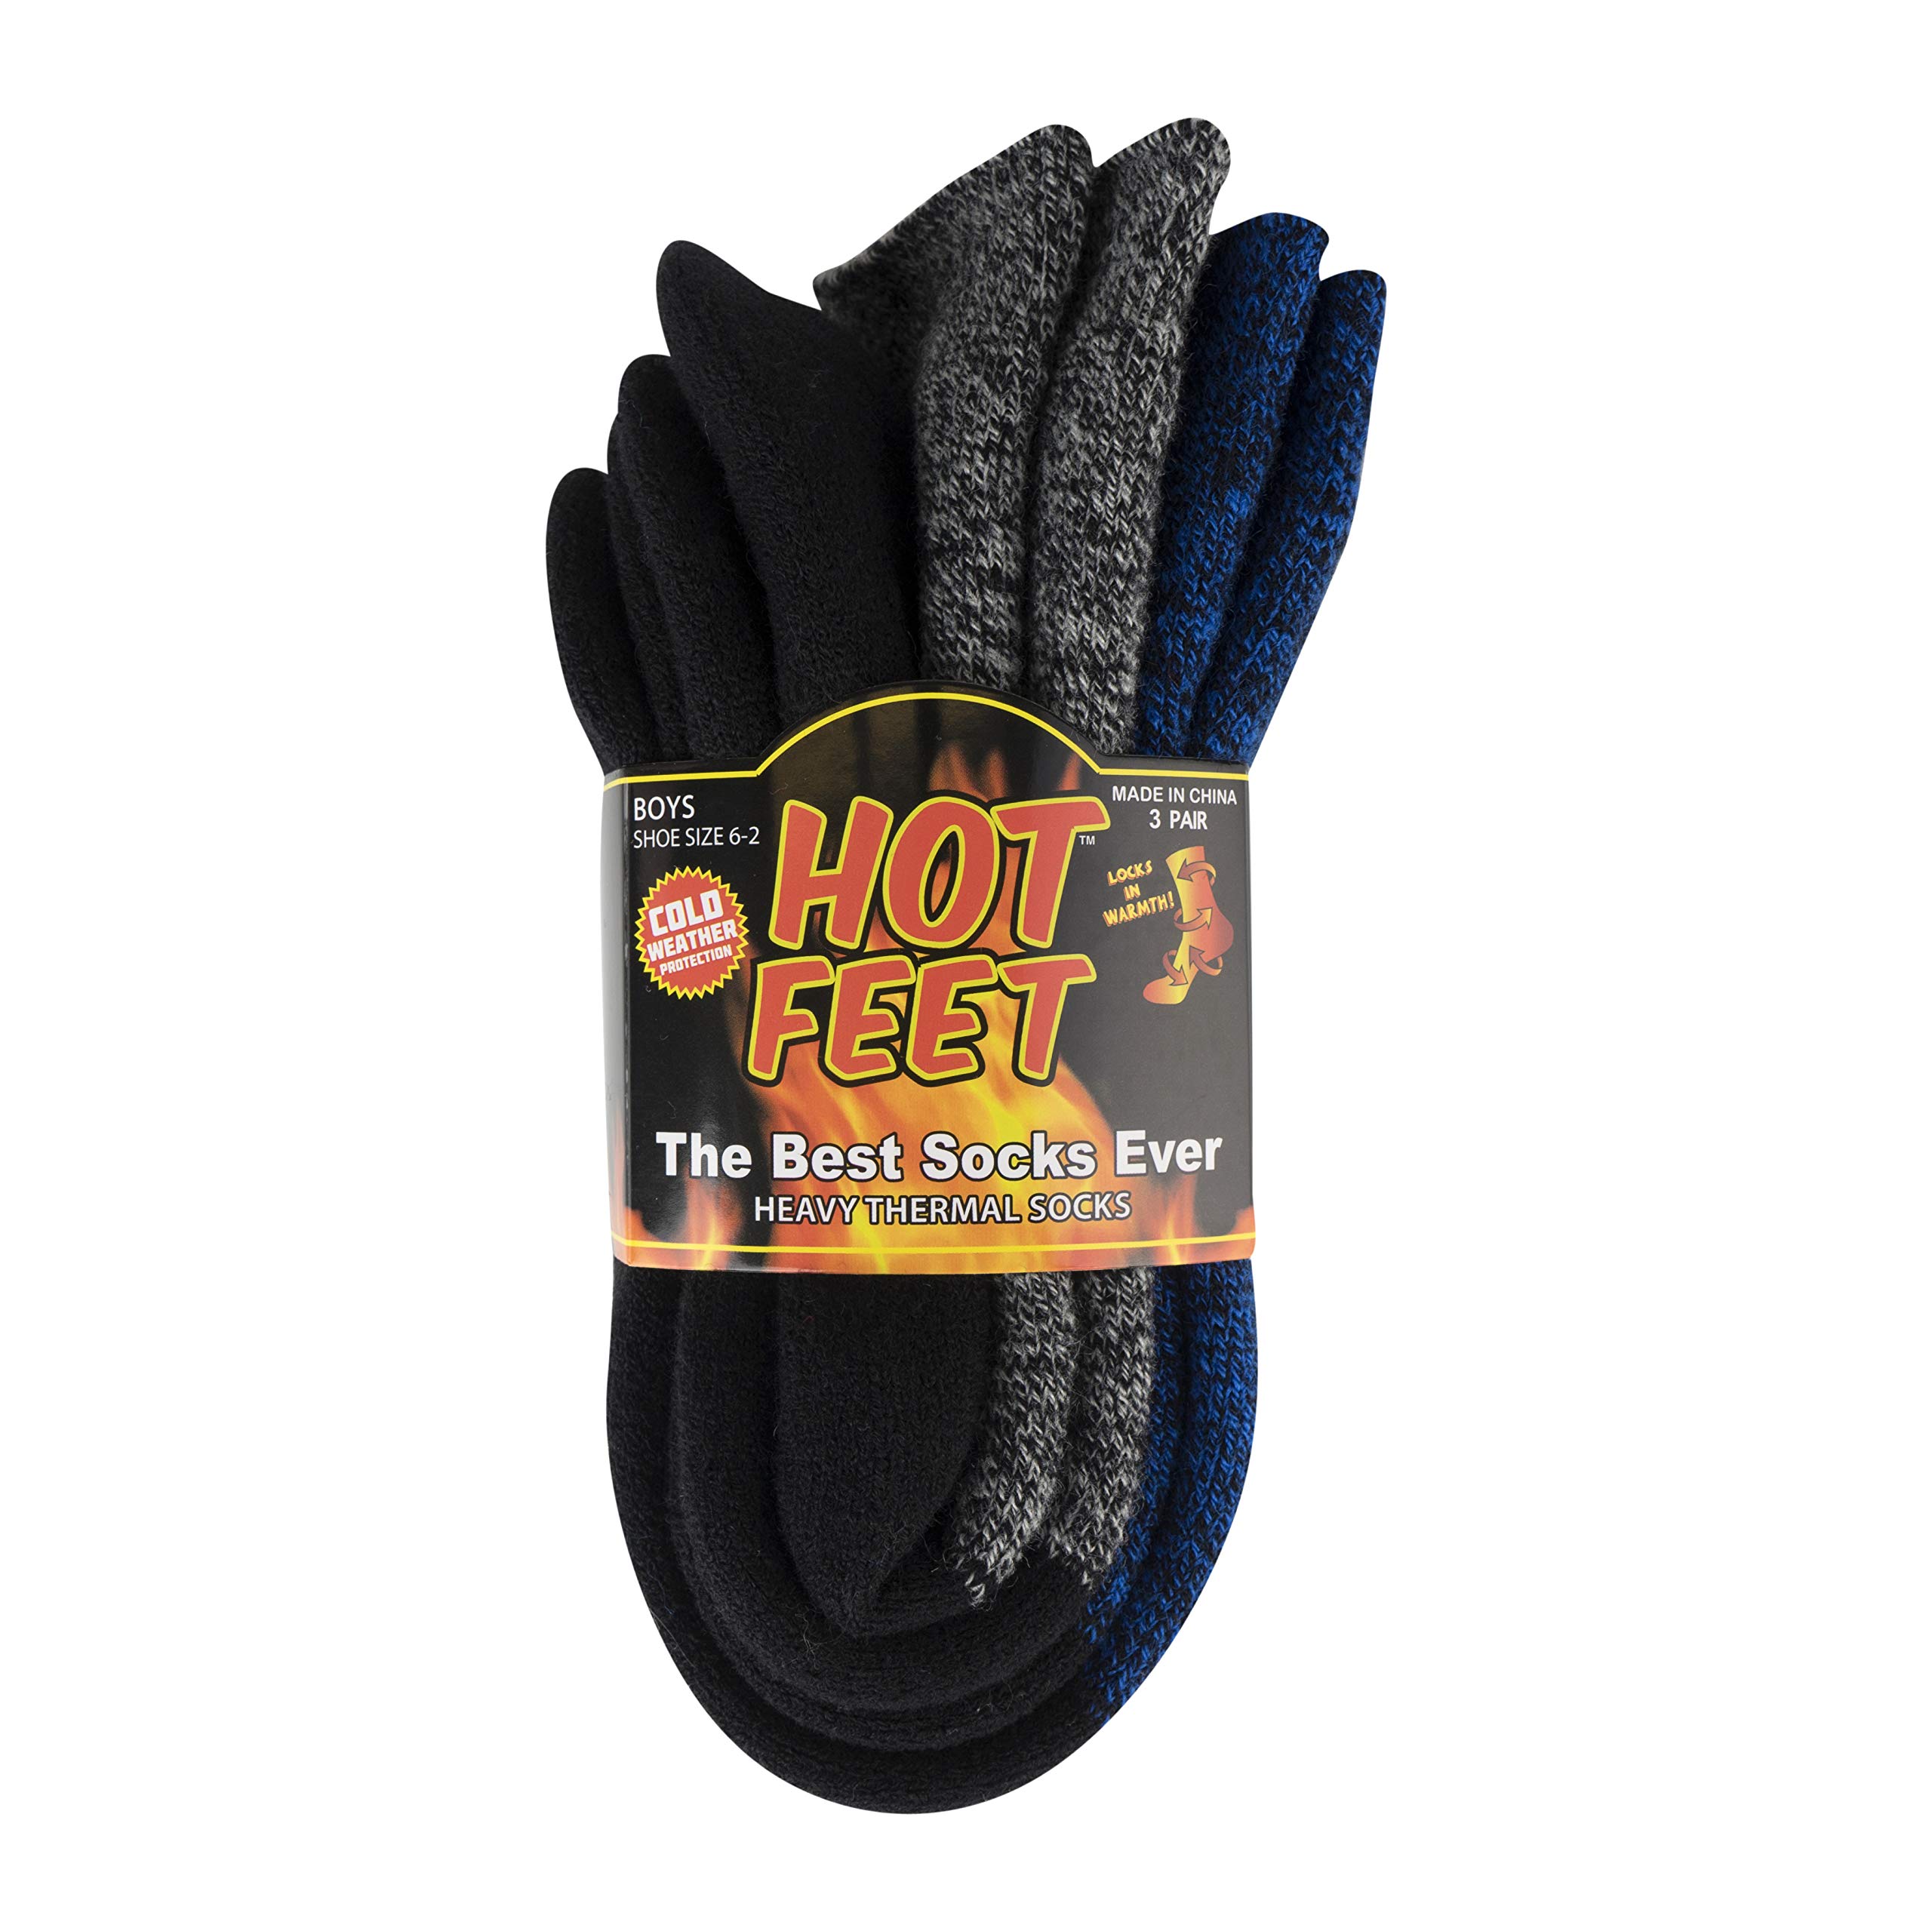 HOT FEET Boys and Girls 2 Pack Heavy Thermal Socks - Traps in Warmth - Thick Insulated Crew for Hiking and Cold Weather